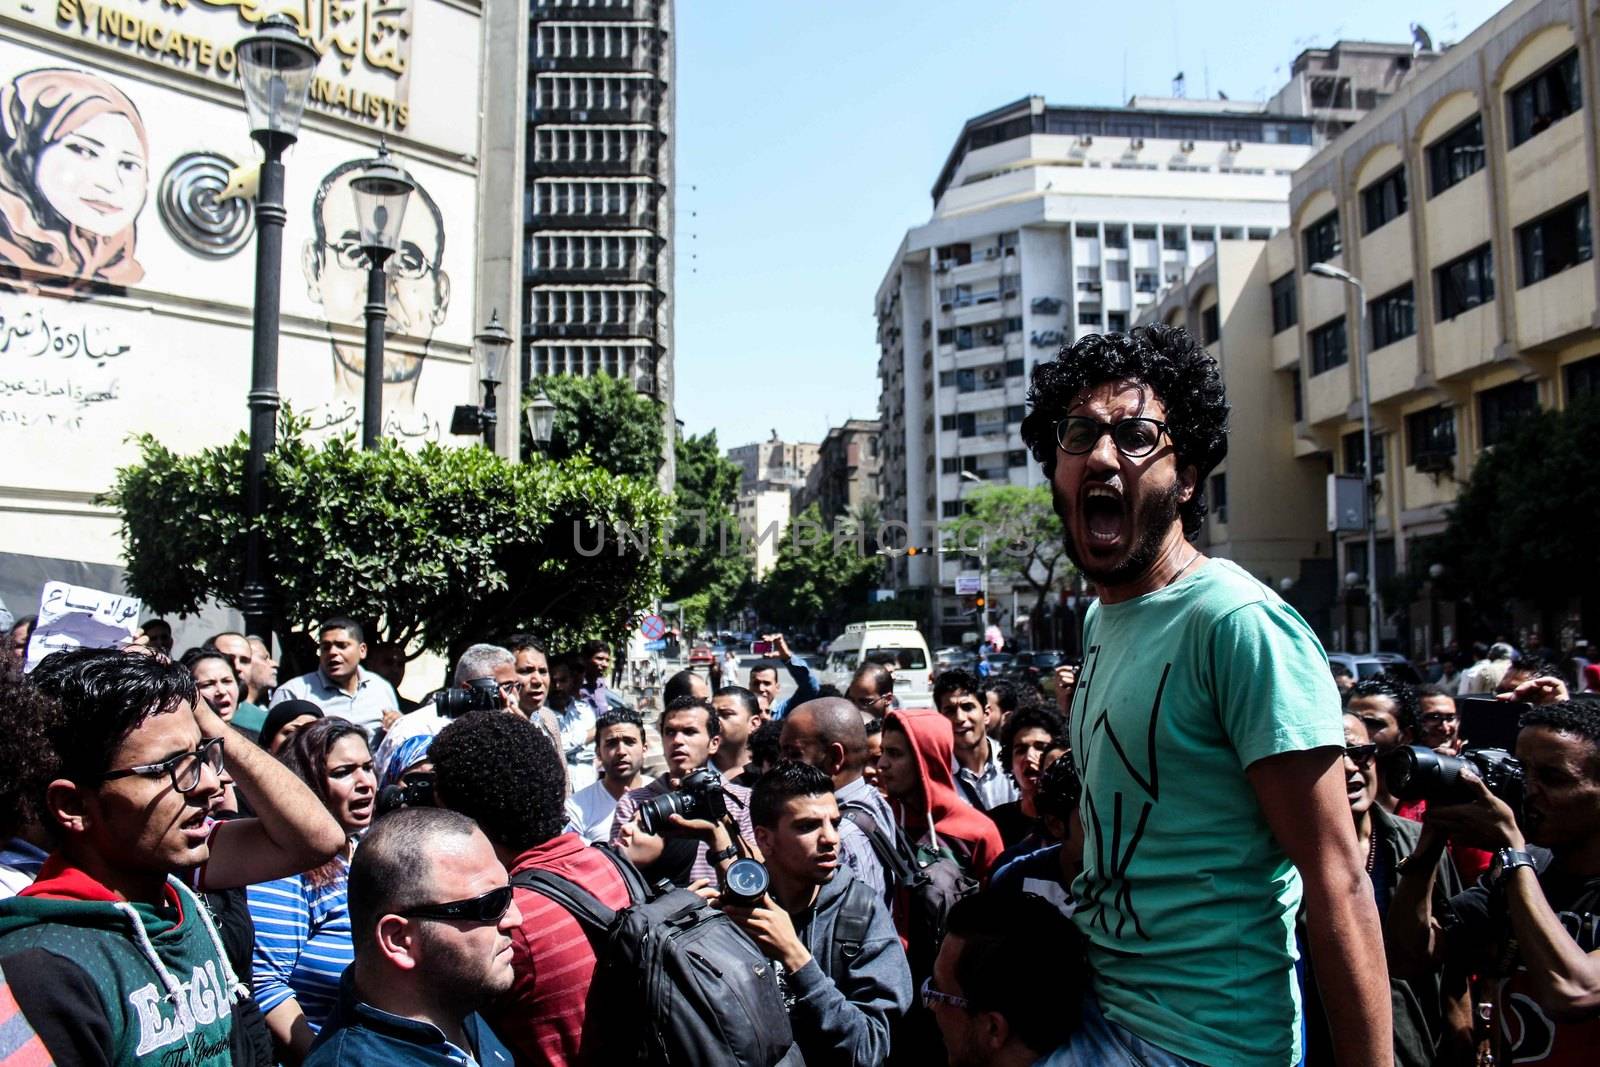 EGYPT, Cairo: A protester cries out as thousands rally in front of the Syndicate of Journalists in Cairo on April 15, 2016 during a demonstration against the decision to hand over control of two strategic Red Sea islands, Tiran and Sanafir, to Saudi Arabia.